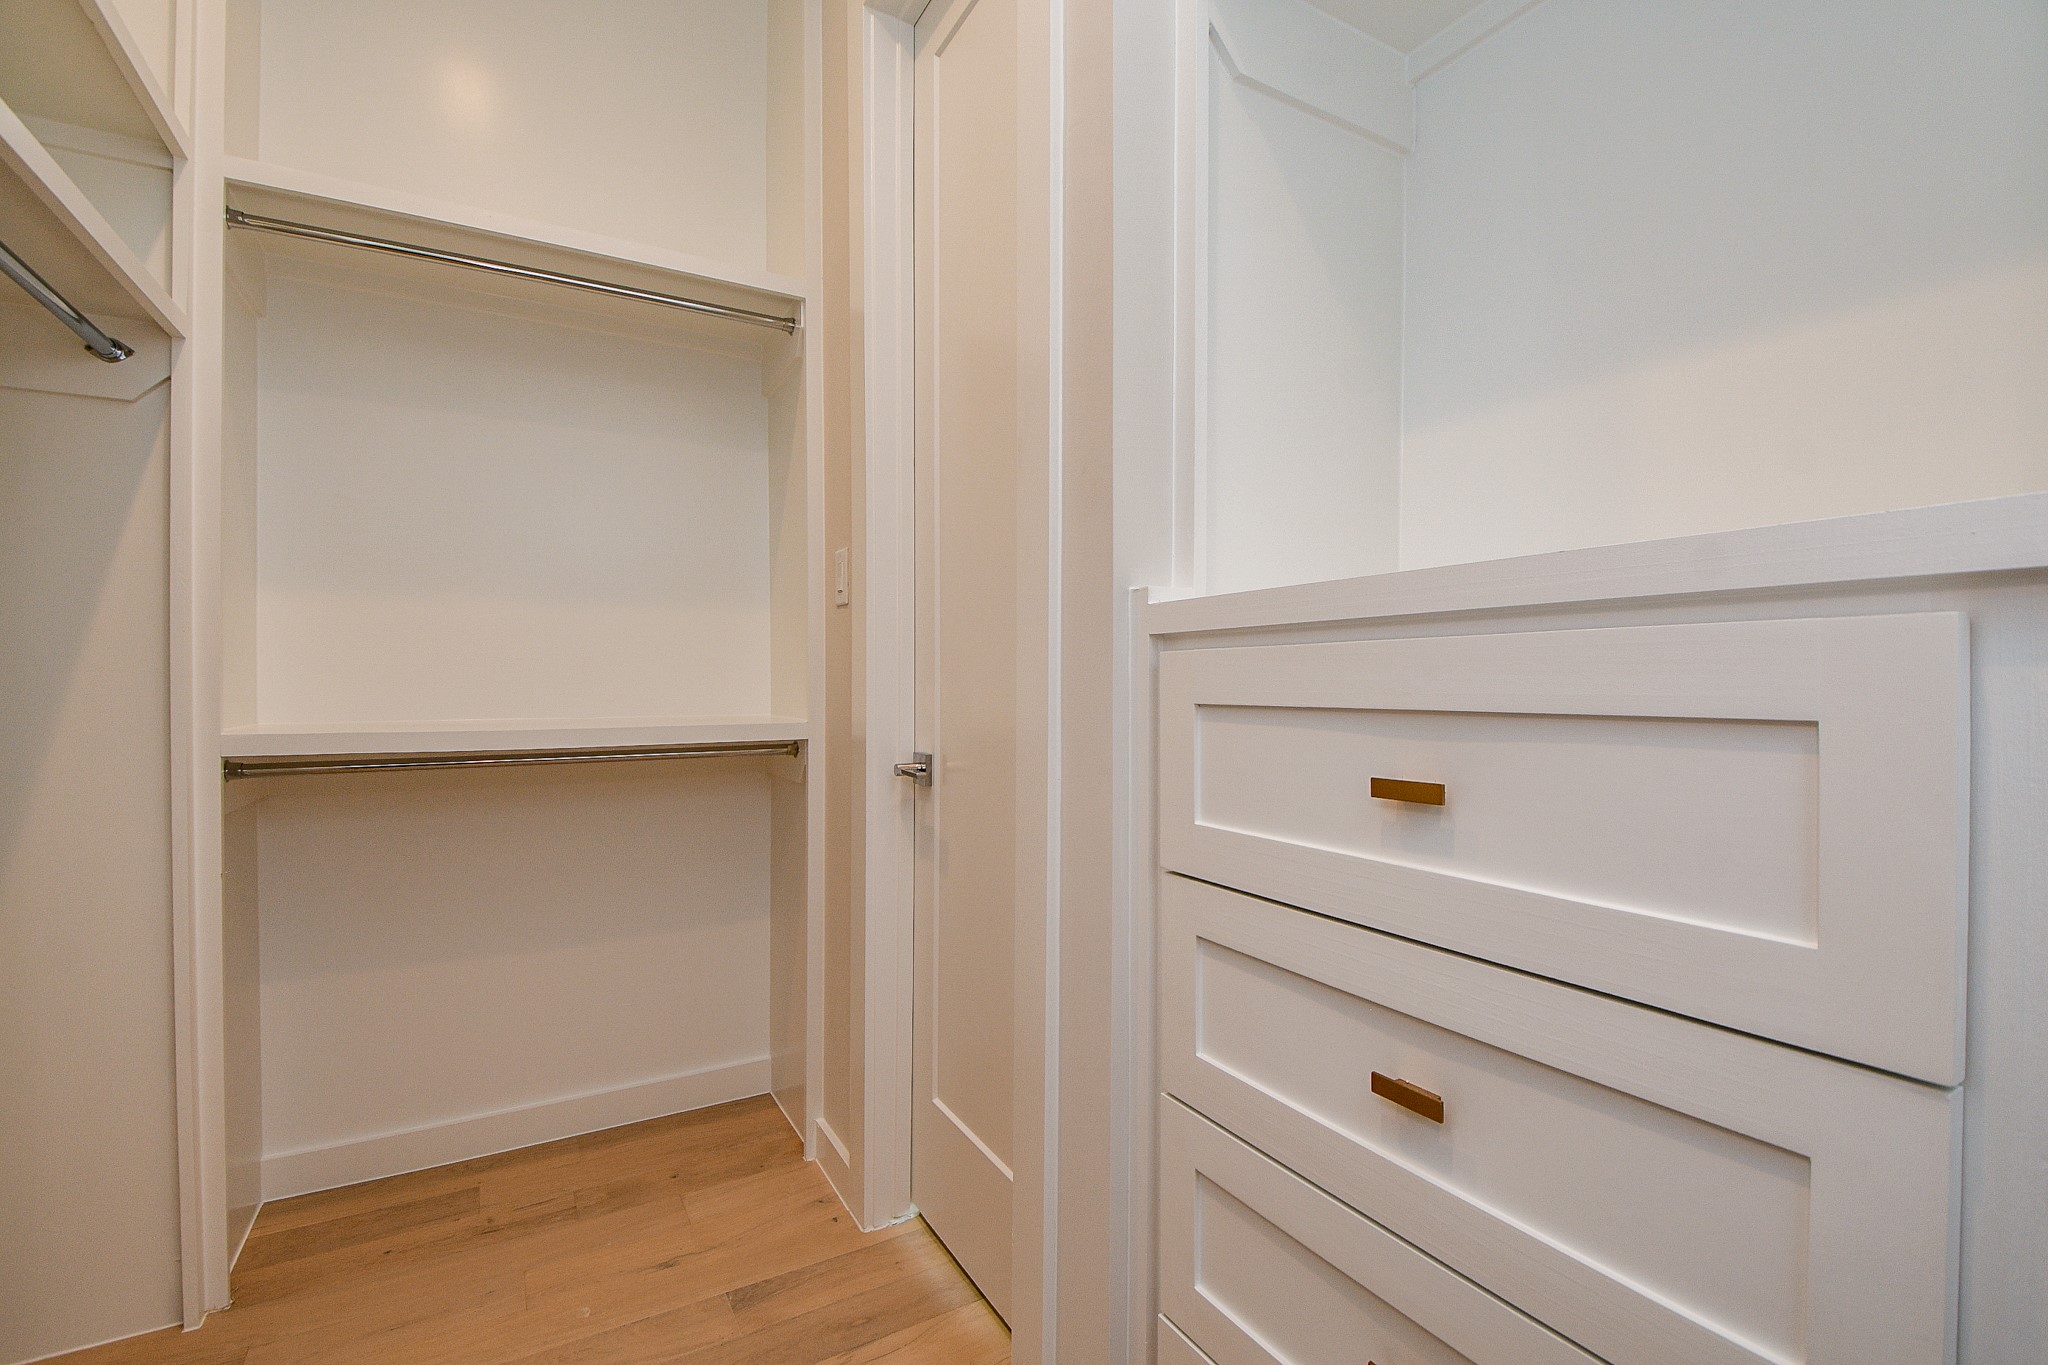 Closets will also feature the same style of custom built ins pictured in this recently completed home by same developer*